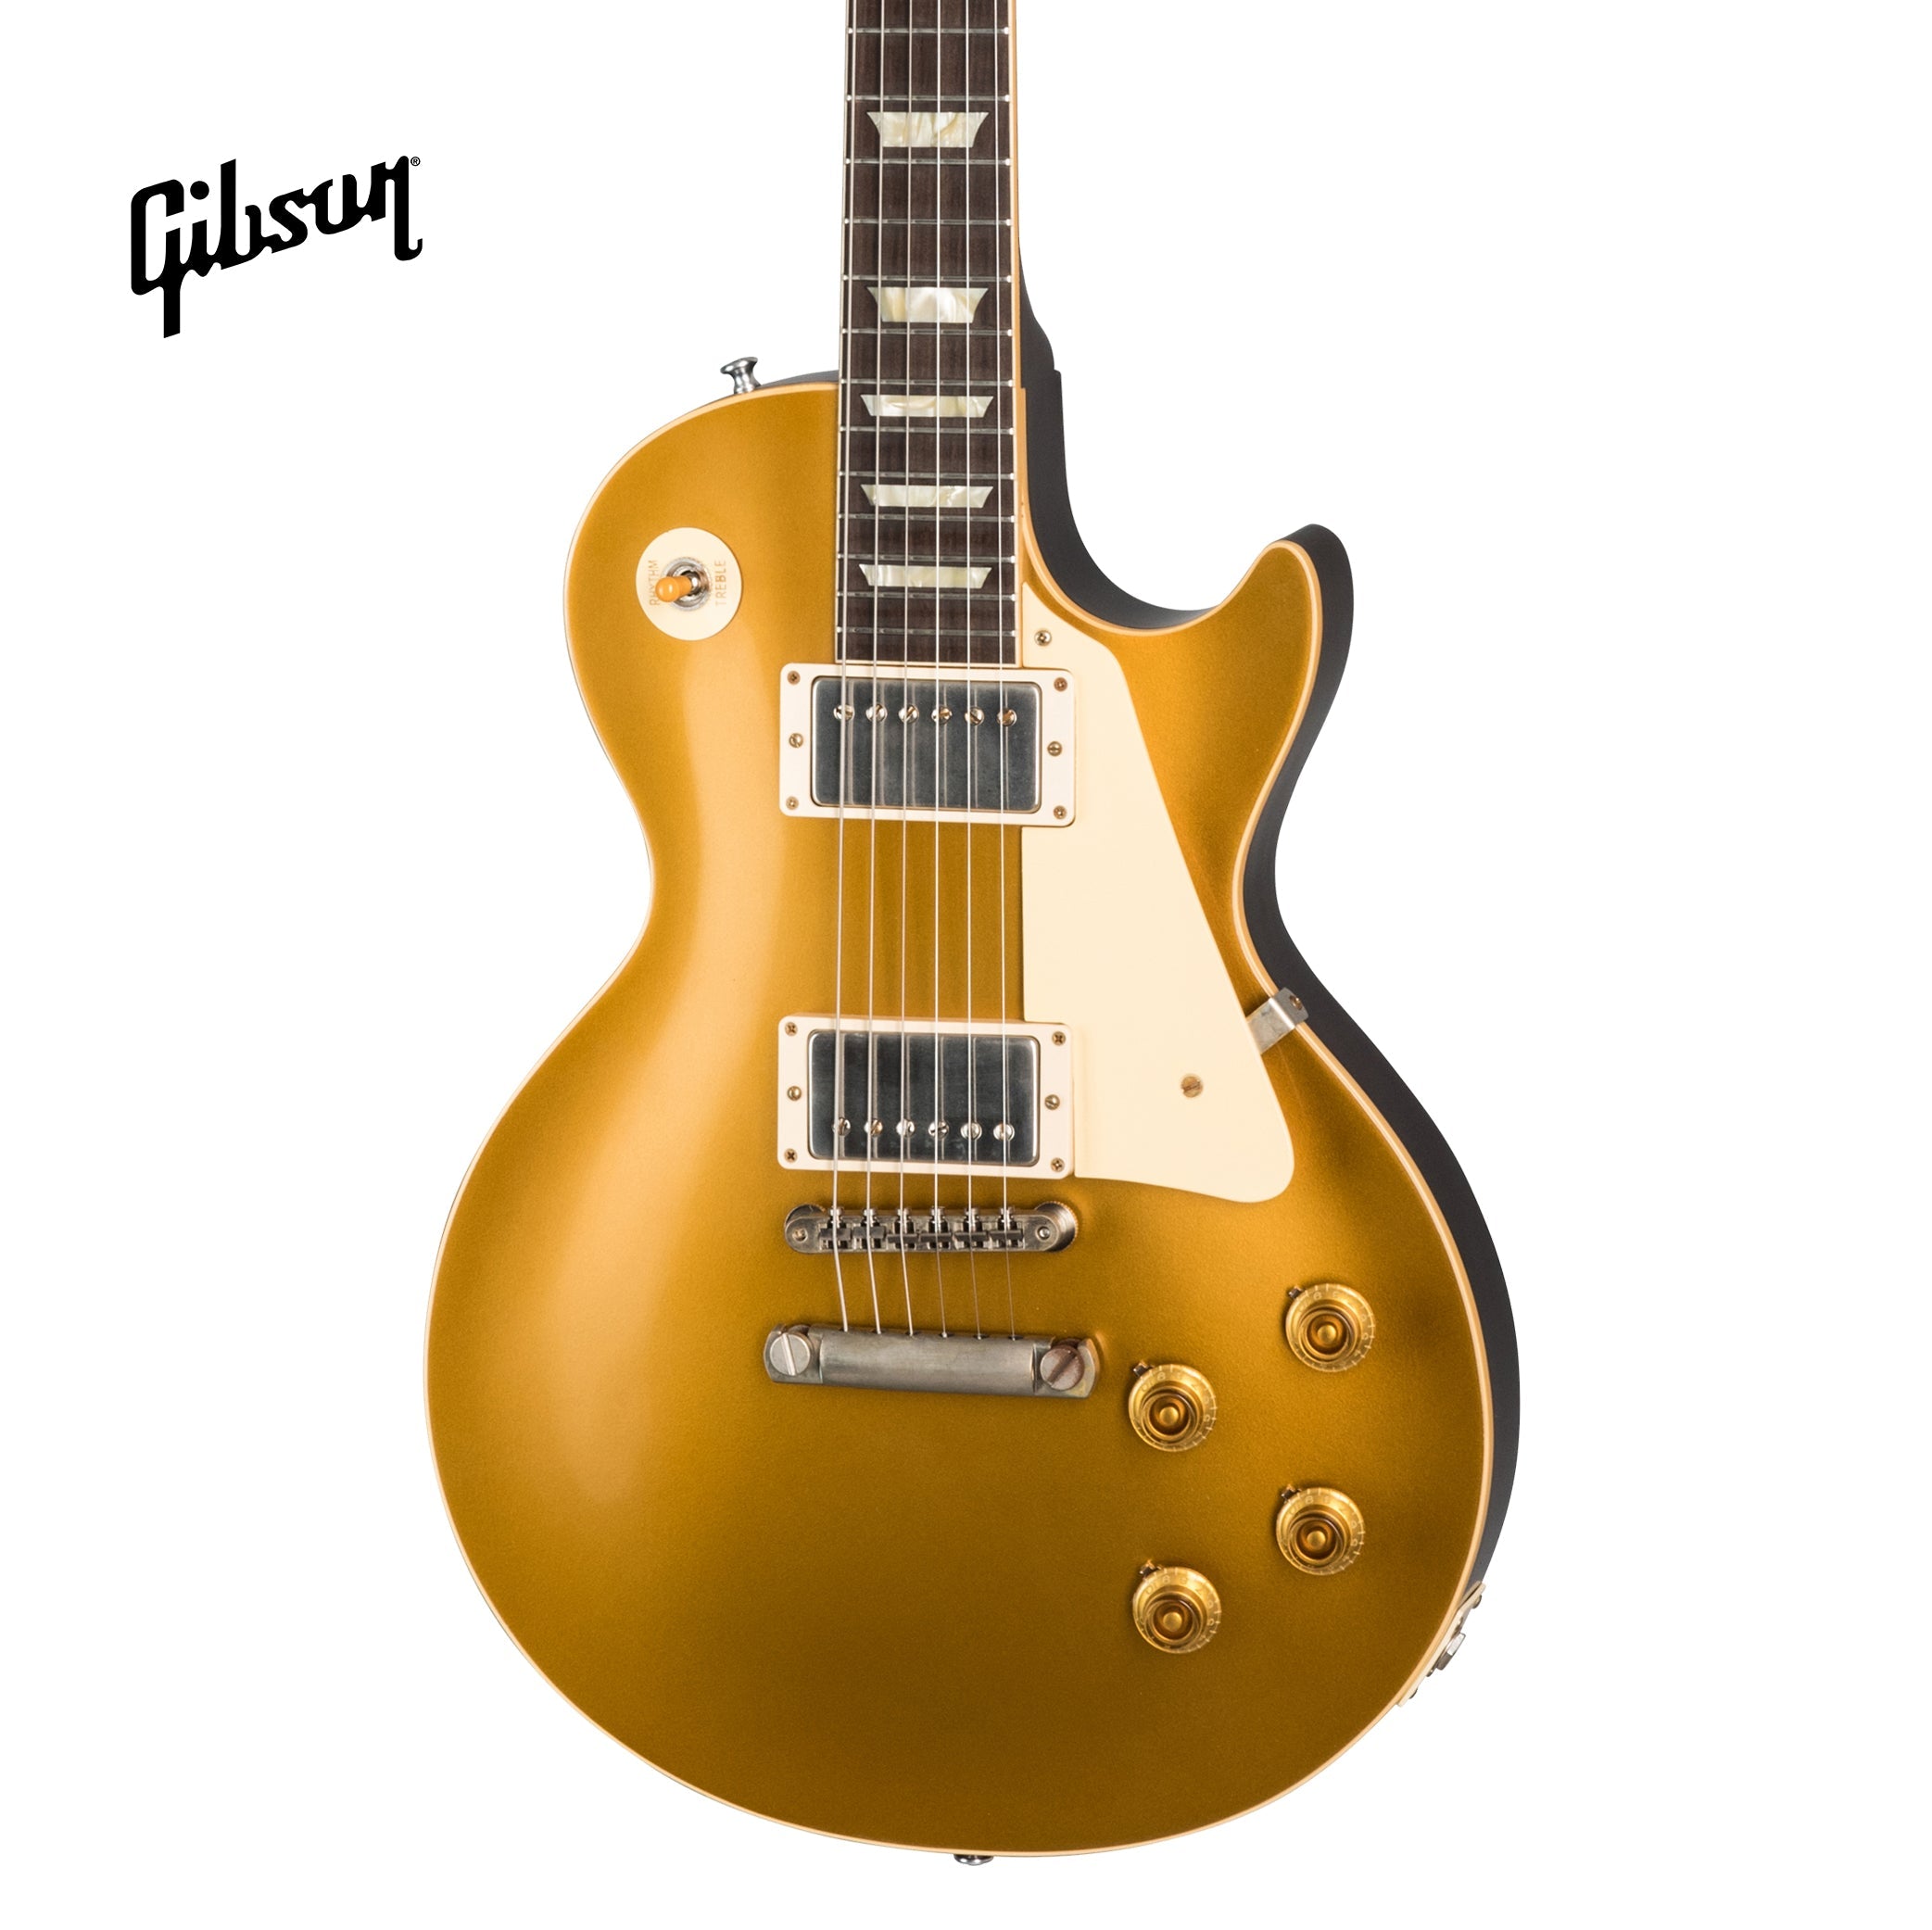 GIBSON 1957 LES PAUL GOLDTOP DARKBACK REISSUE VOS ELECTRIC GUITAR - DOUBLE GOLD